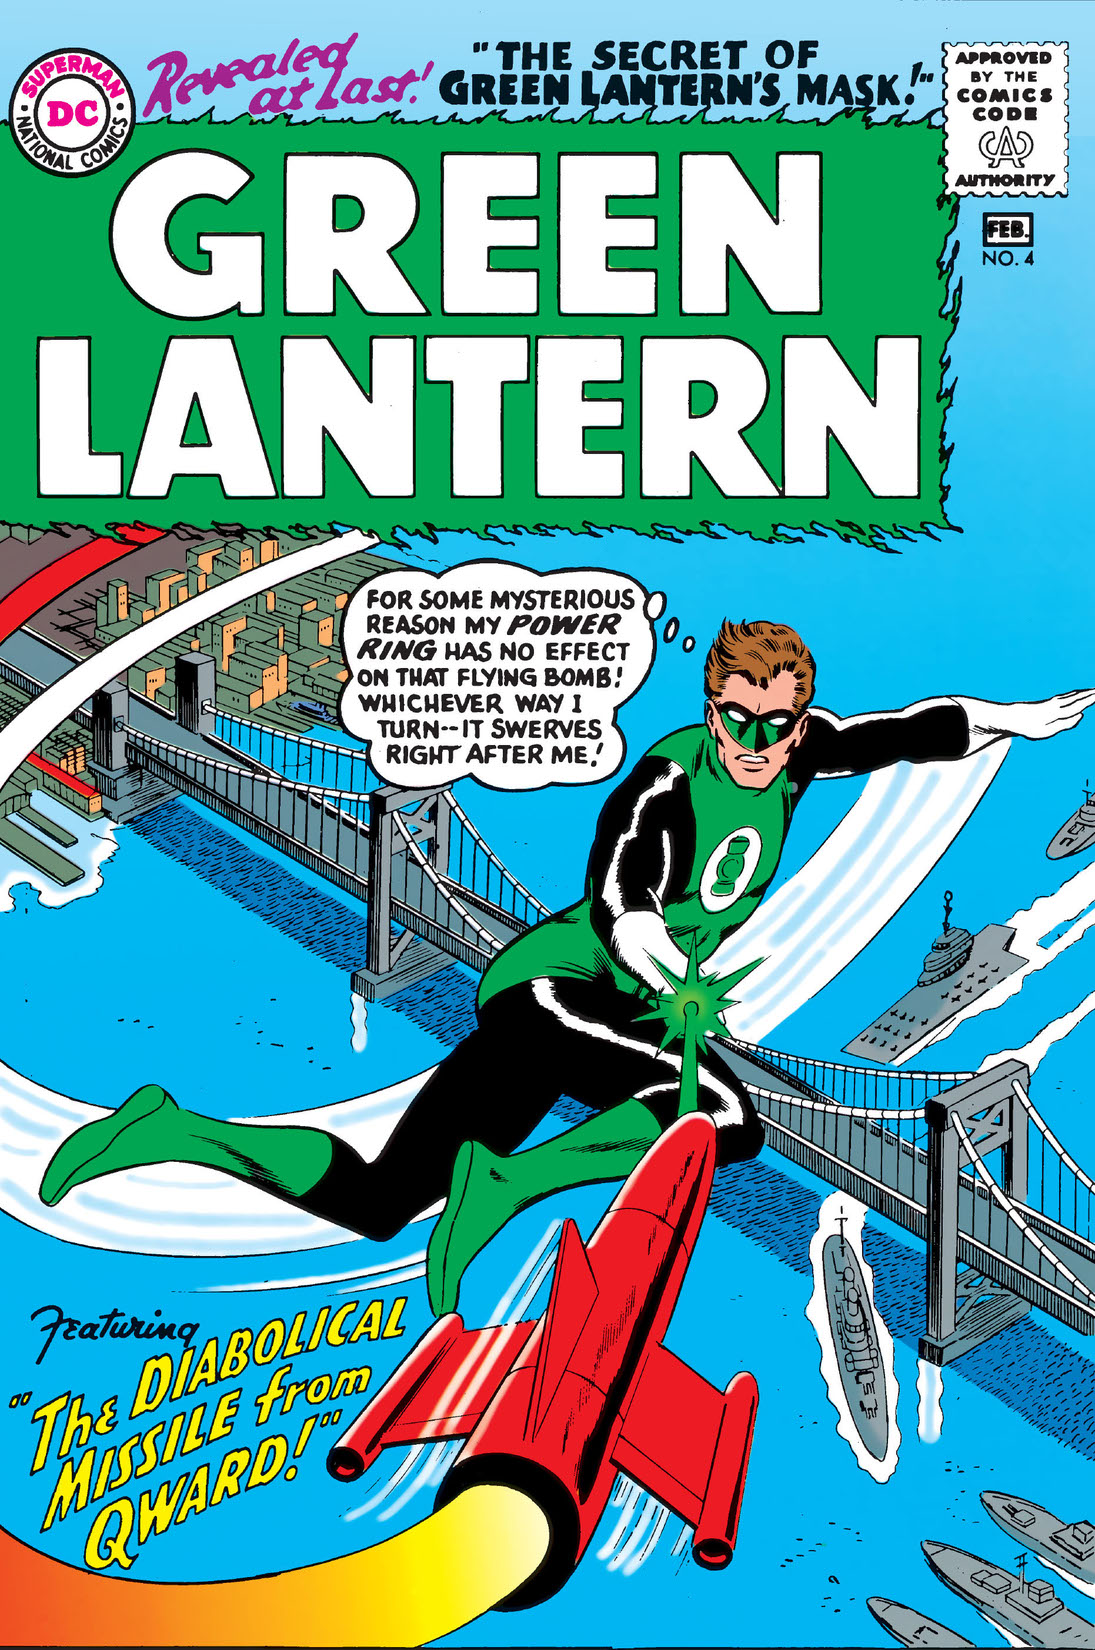 Green Lantern (1960-) #4 preview images